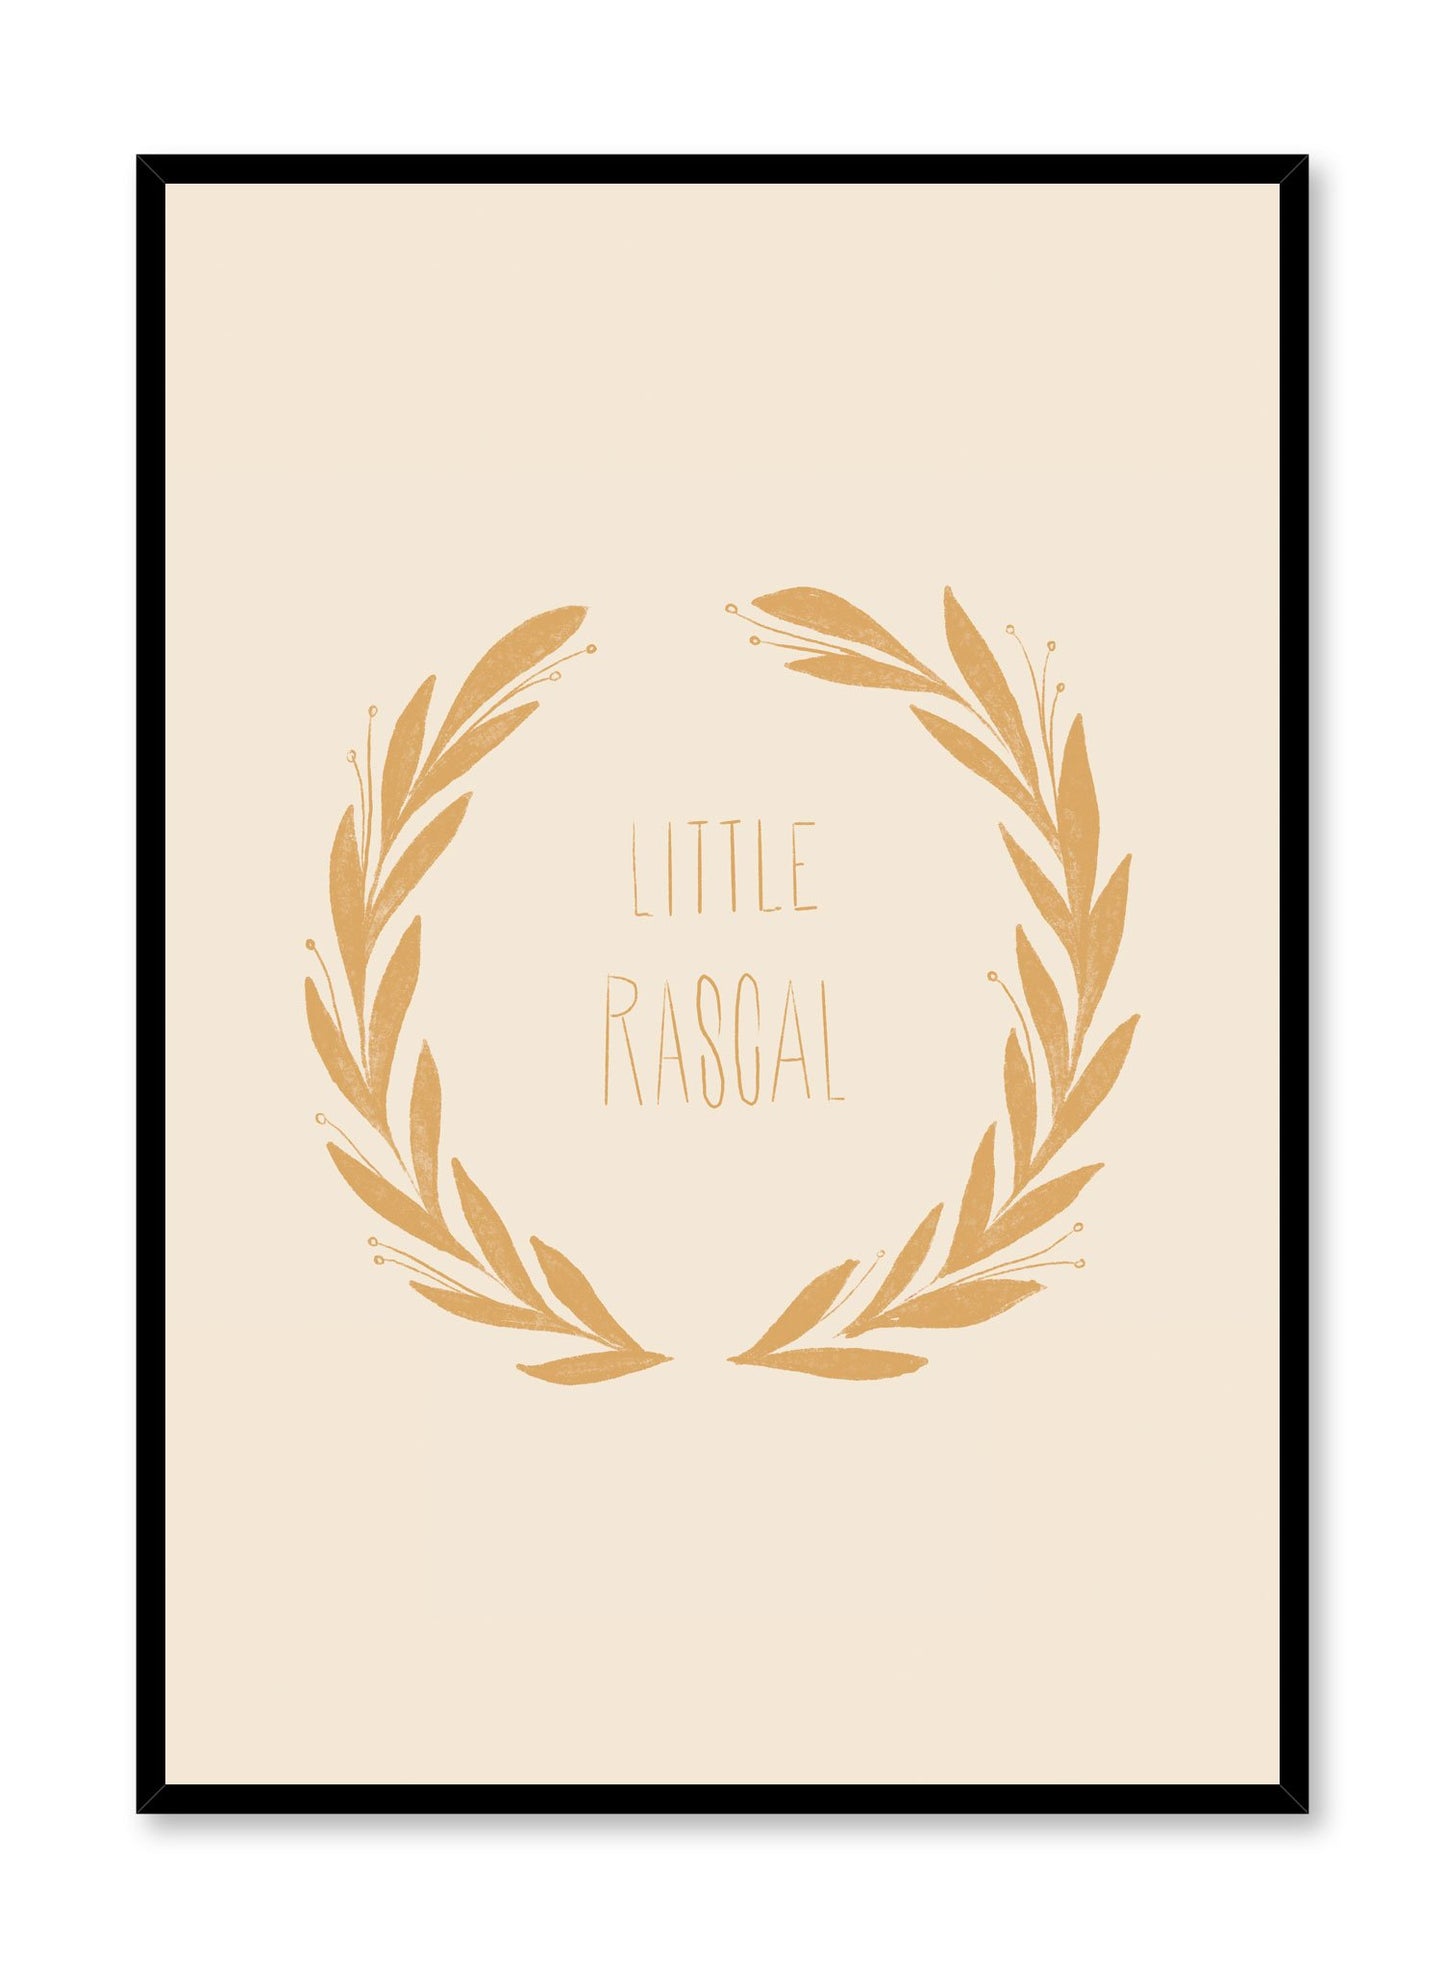 Little Rascal is a minimalist typography by Opposite Wall of the words "Little Rascal" wrapped around a leaf pattern. 